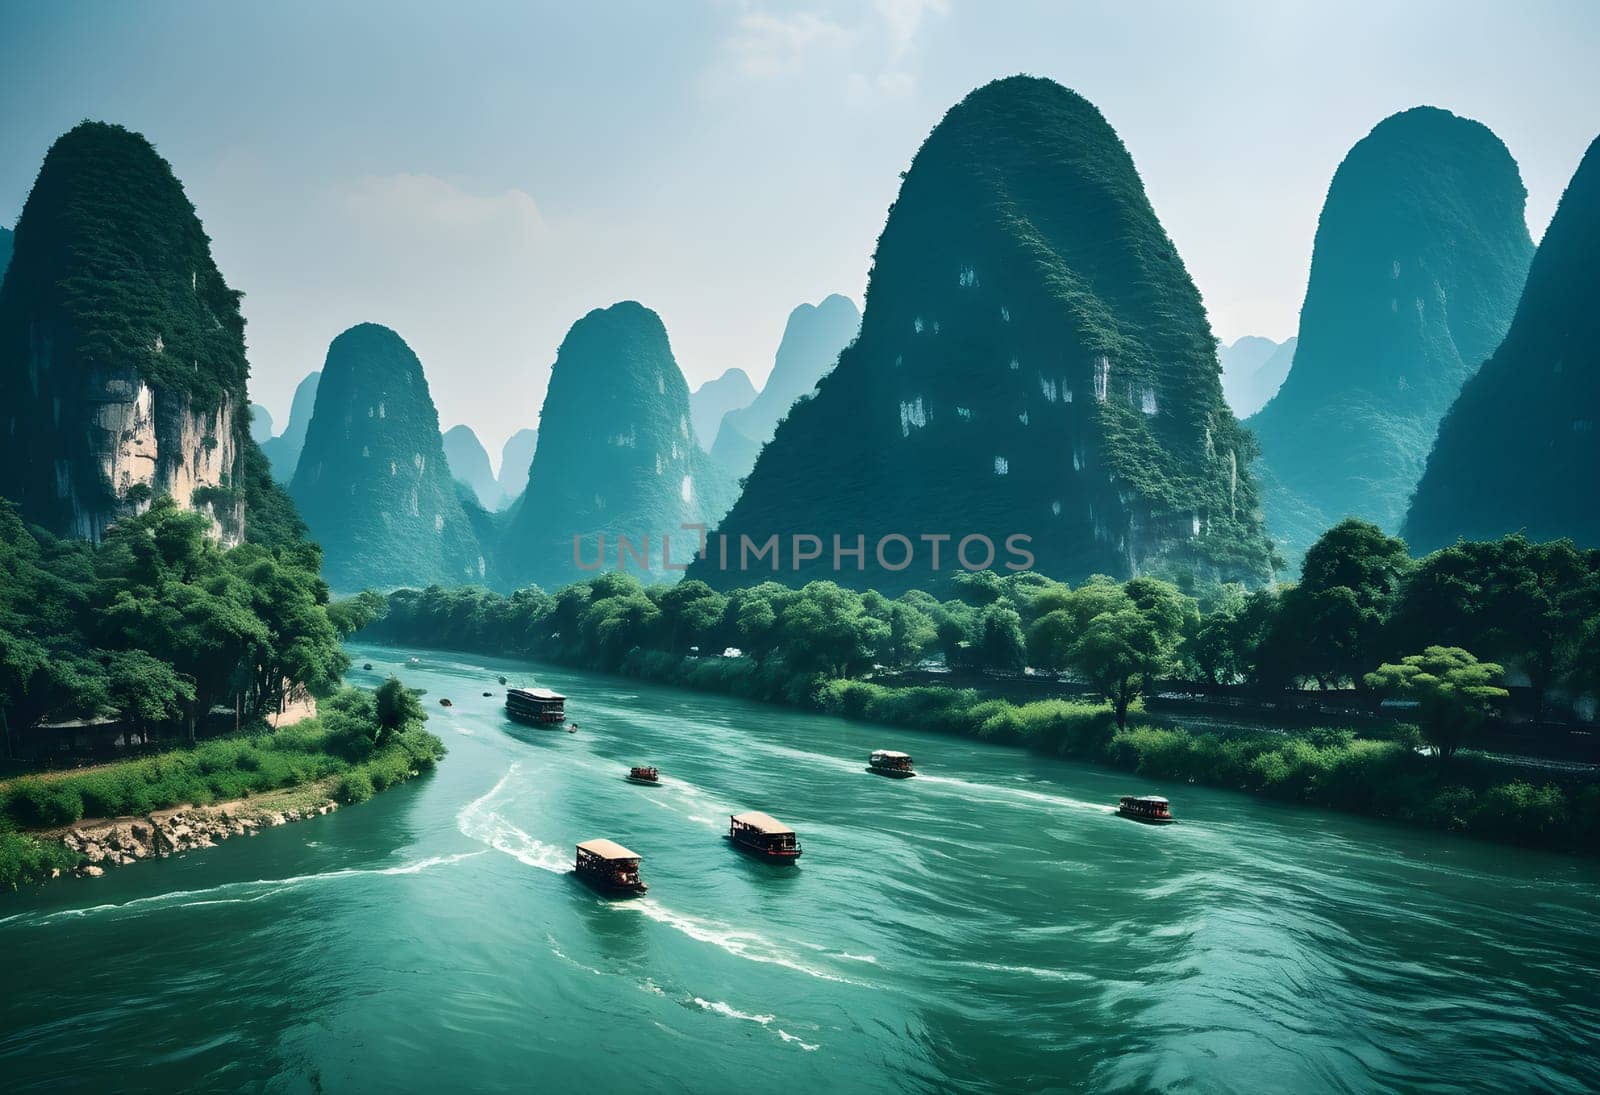 Journey Along the Li River: Exploring the Iconic Landscapes of Guilin, China